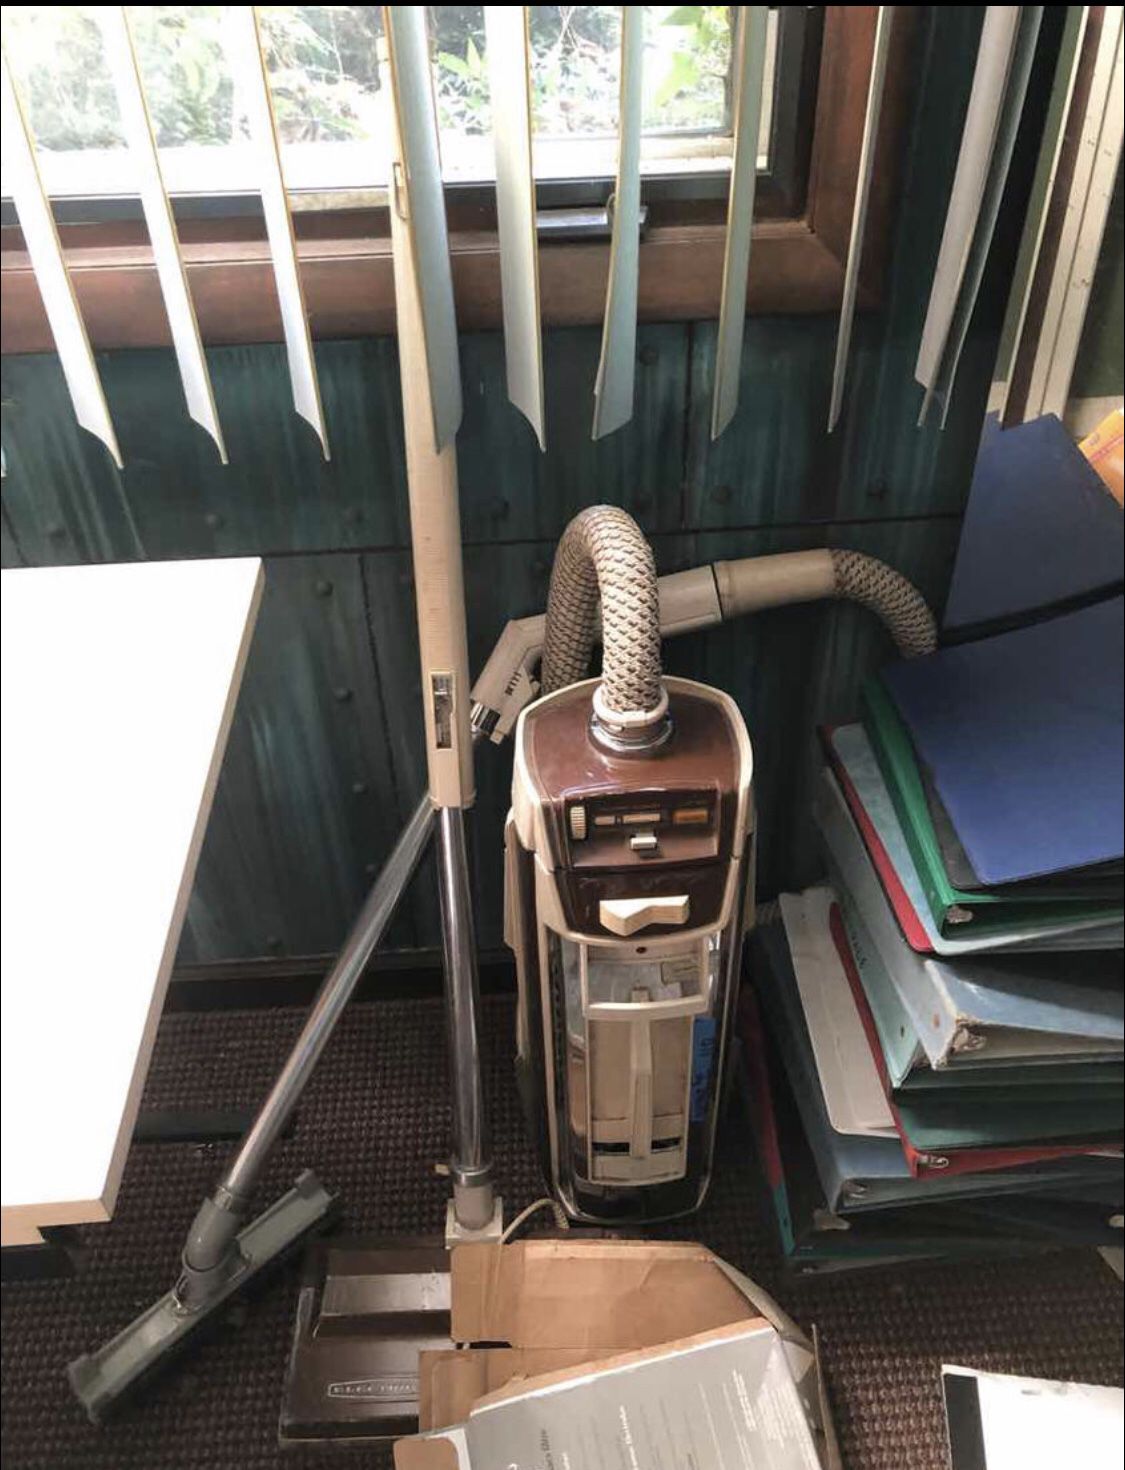 Classic Brown 1960 Electrolux vacuum cleaner